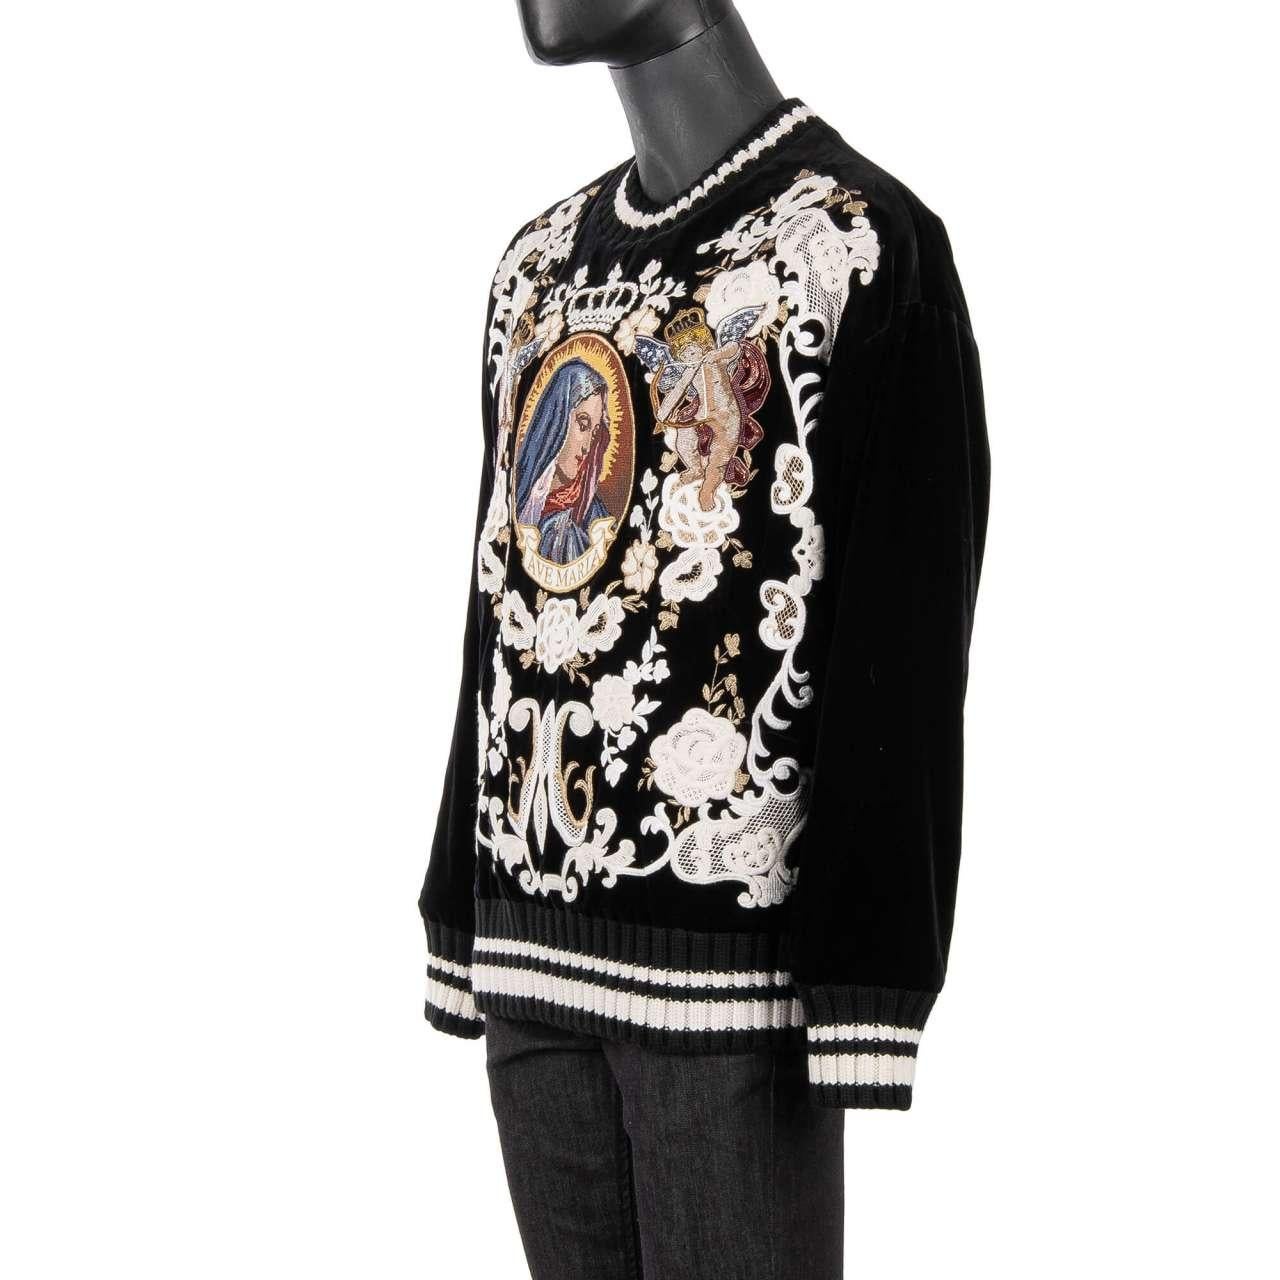 D&G Velvet Sweater with Angels and Santa Maria Embroidery Black White 54 For Sale 1